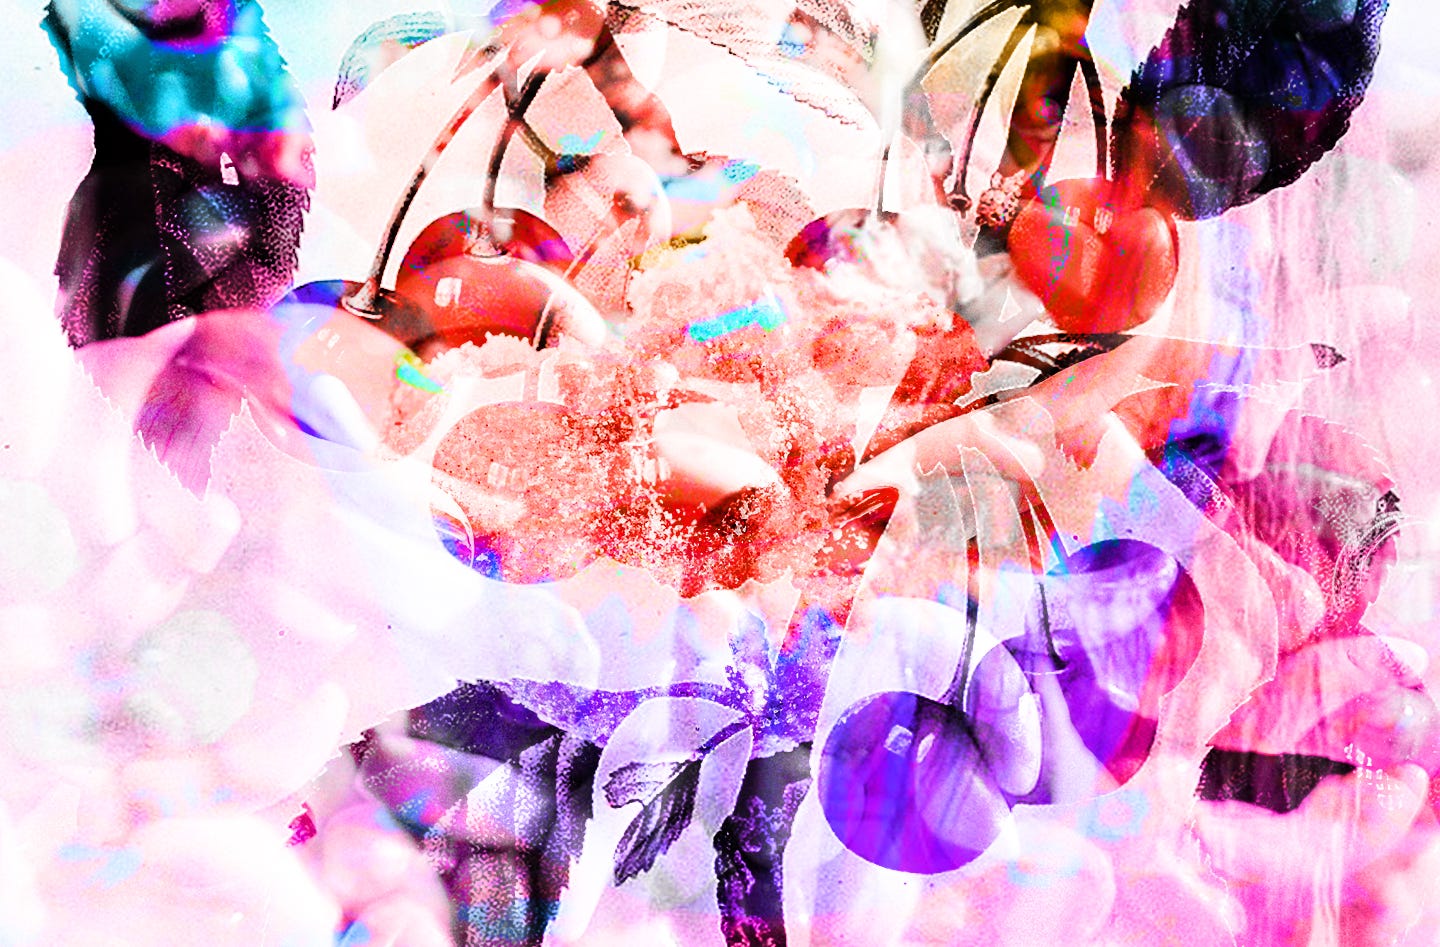 a pink and purple-toned digital collage. discernable elements include a stem of cherries